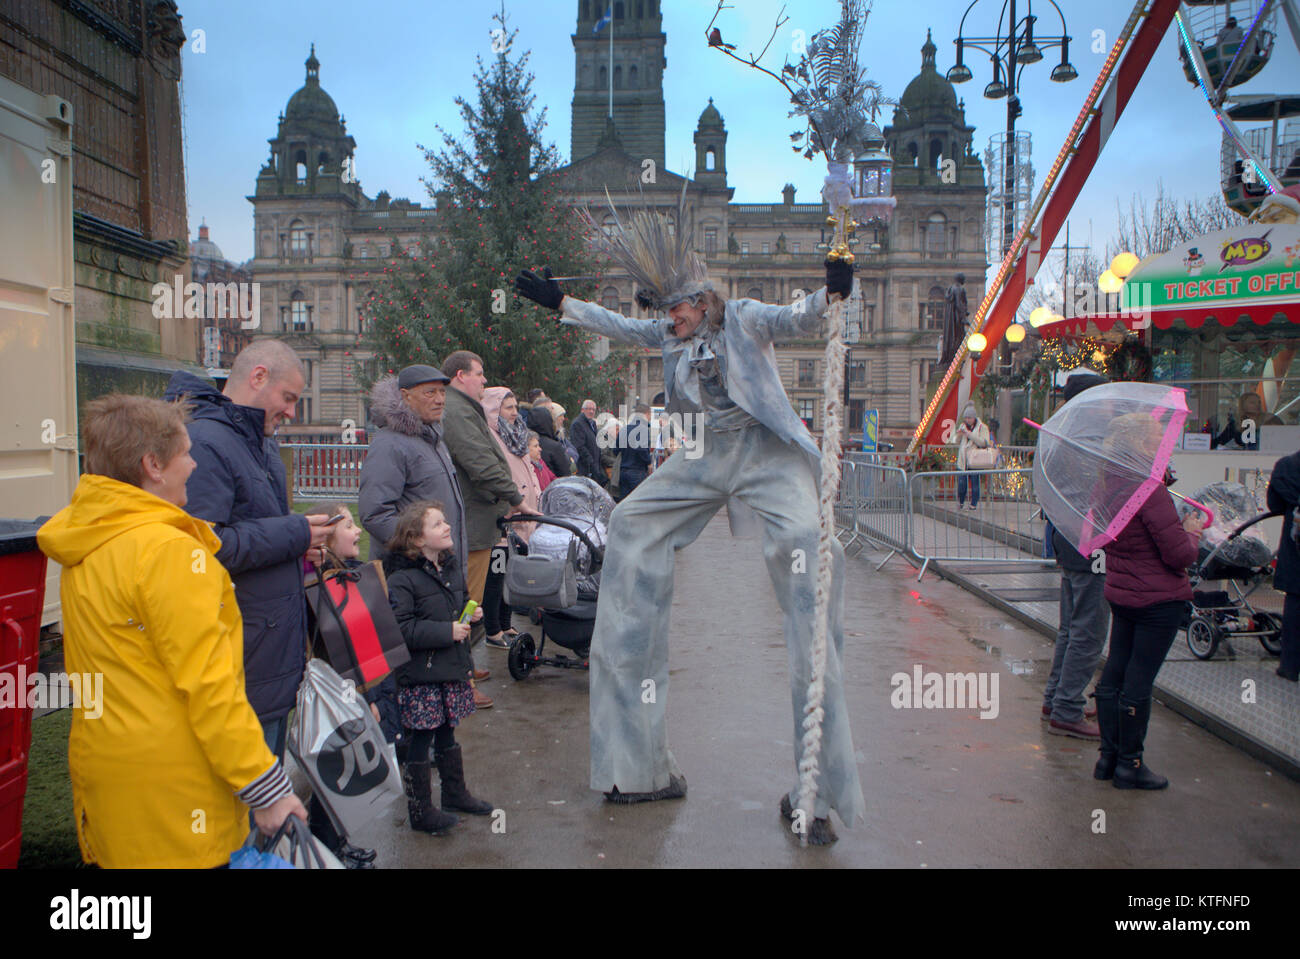 Weather: Rain and wind greet the last minute Christmas Eve visitors to the Christmas fayre meet stilt walker  jack frost  in the city’s George square. Stock Photo